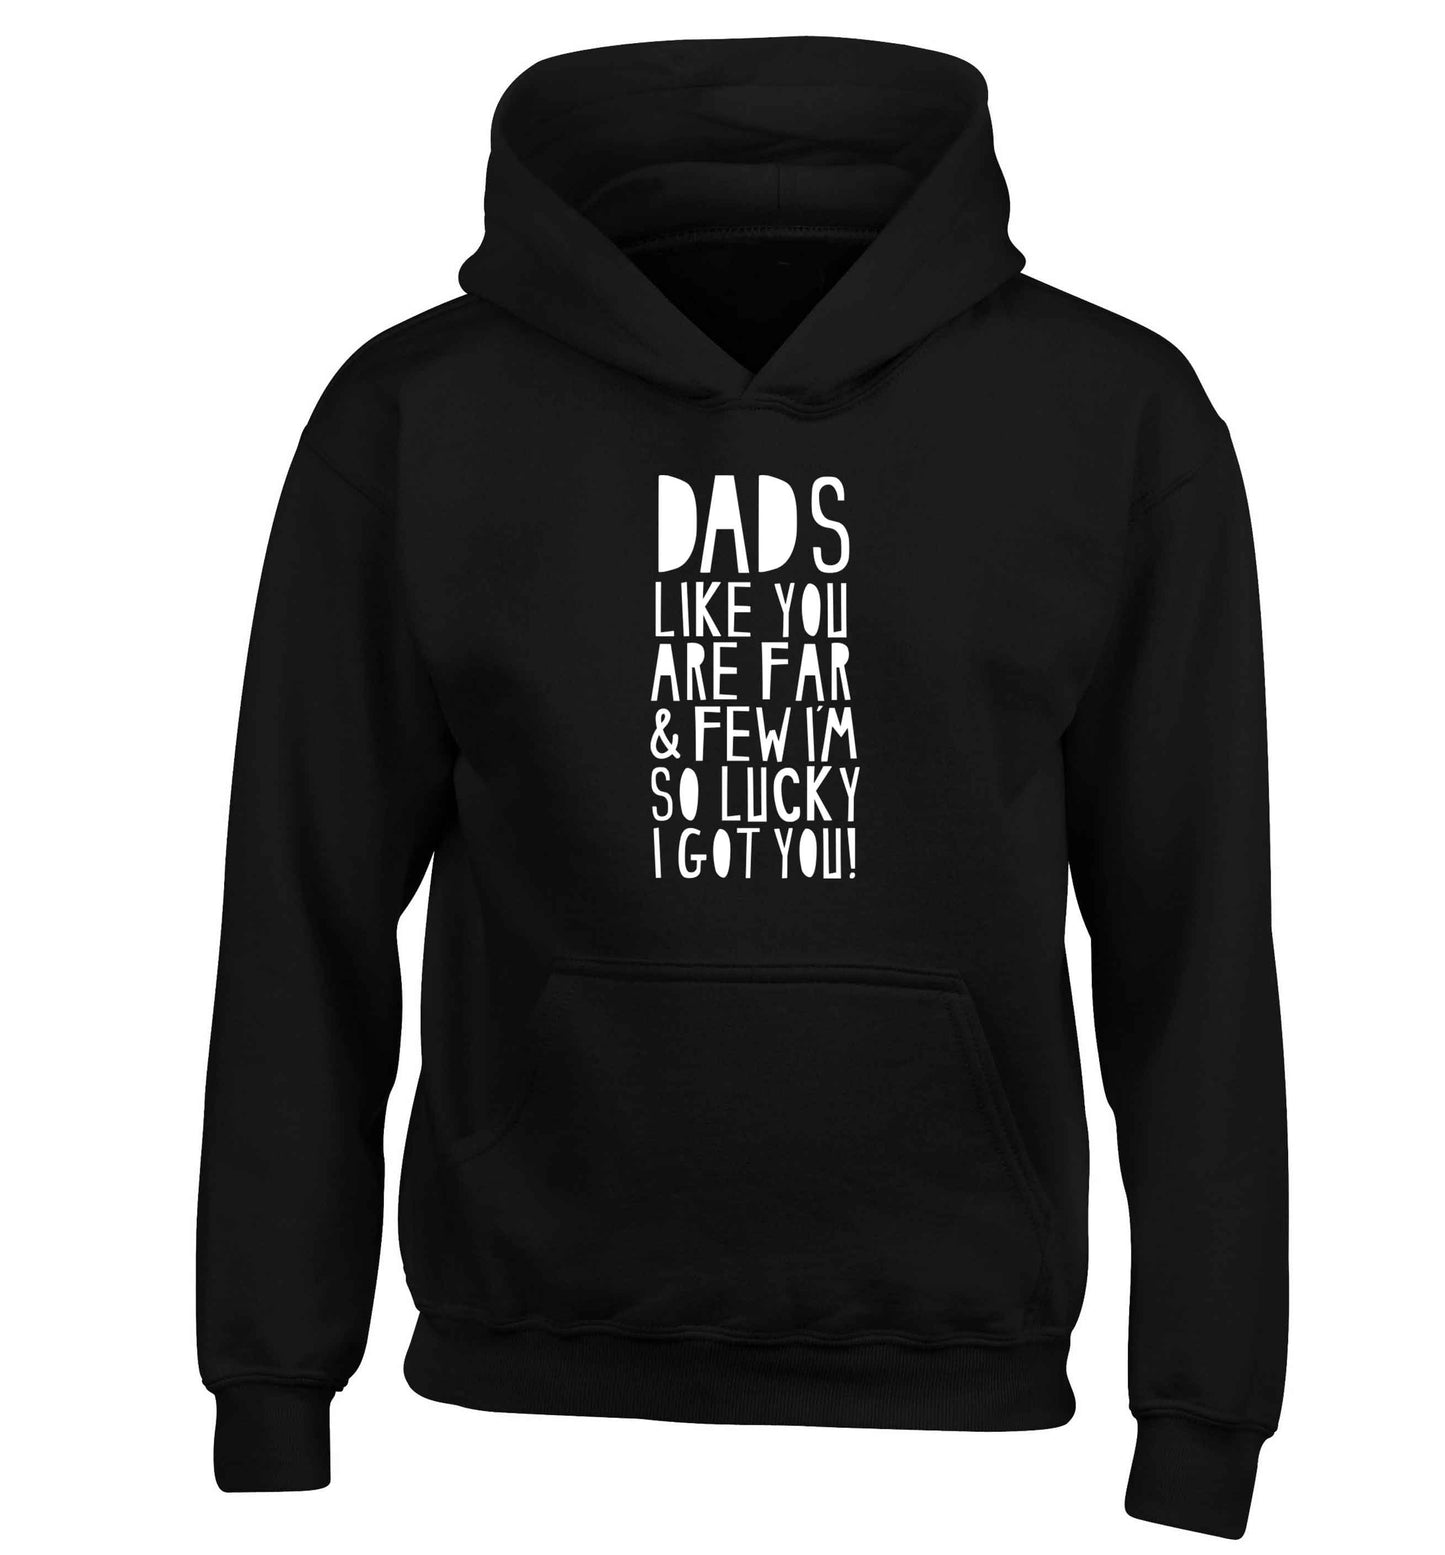 Dads like you are far and few I'm so luck I got you! children's black hoodie 12-13 Years